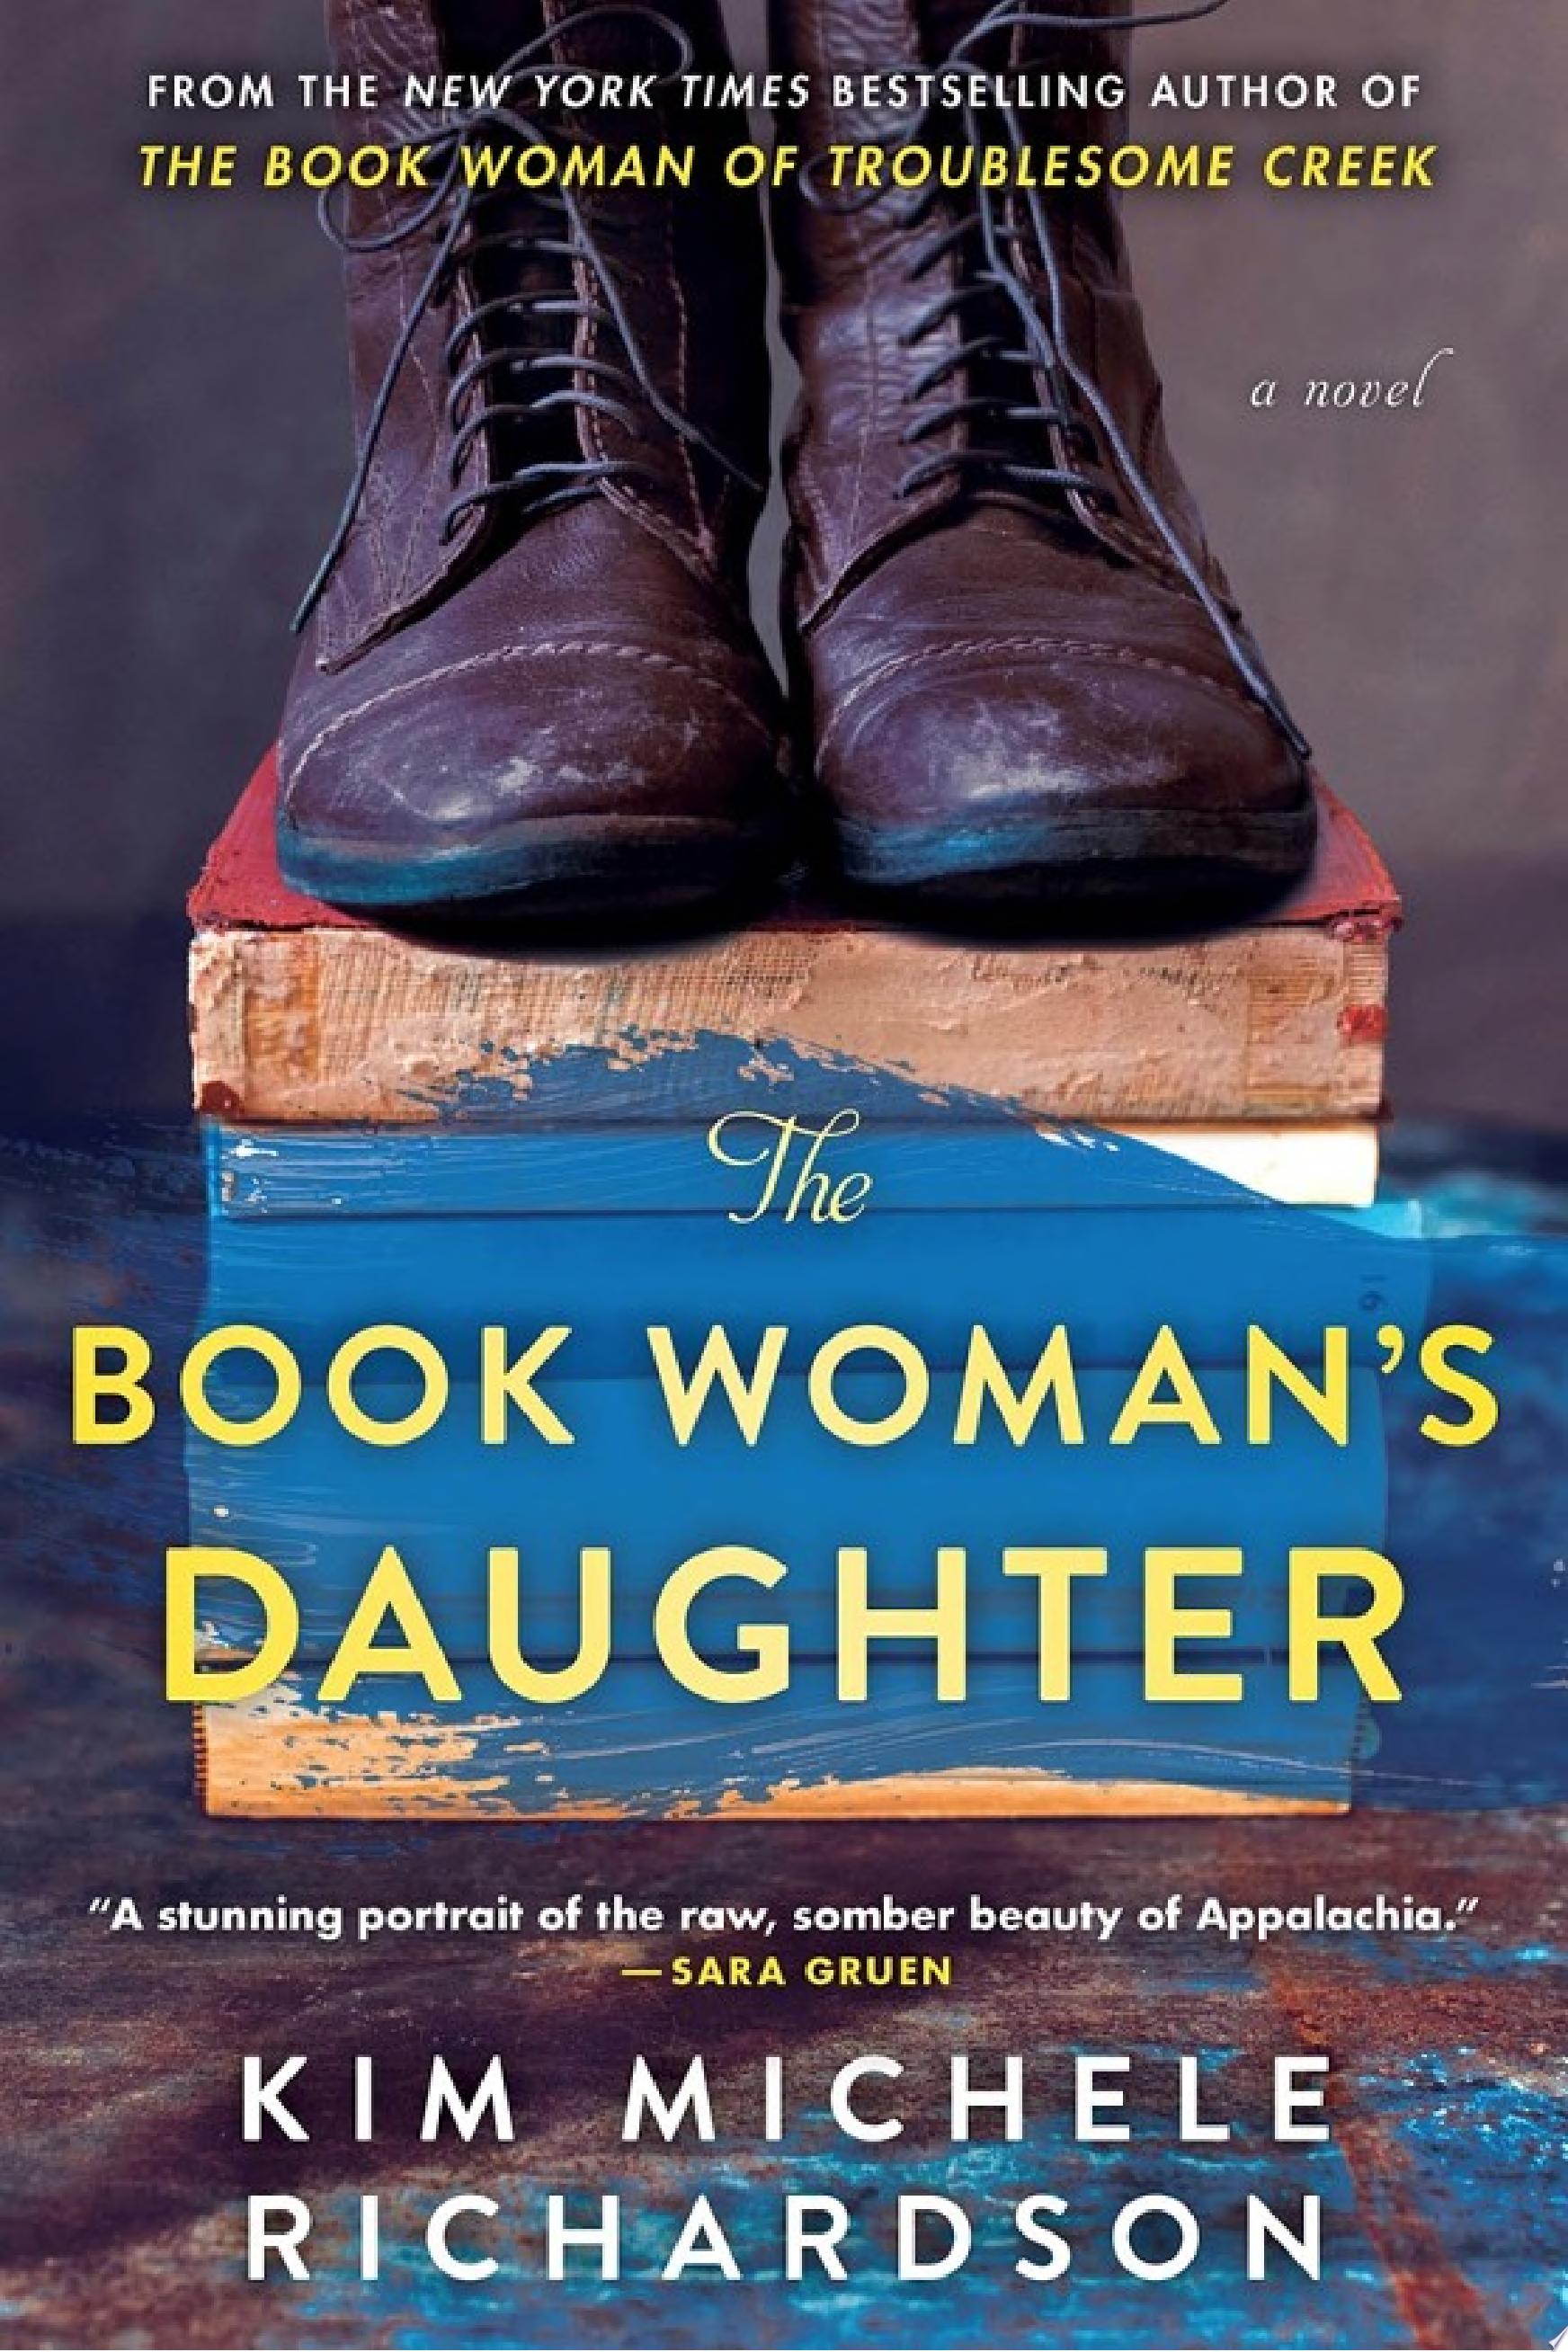 Image for "The Book Woman's Daughter"